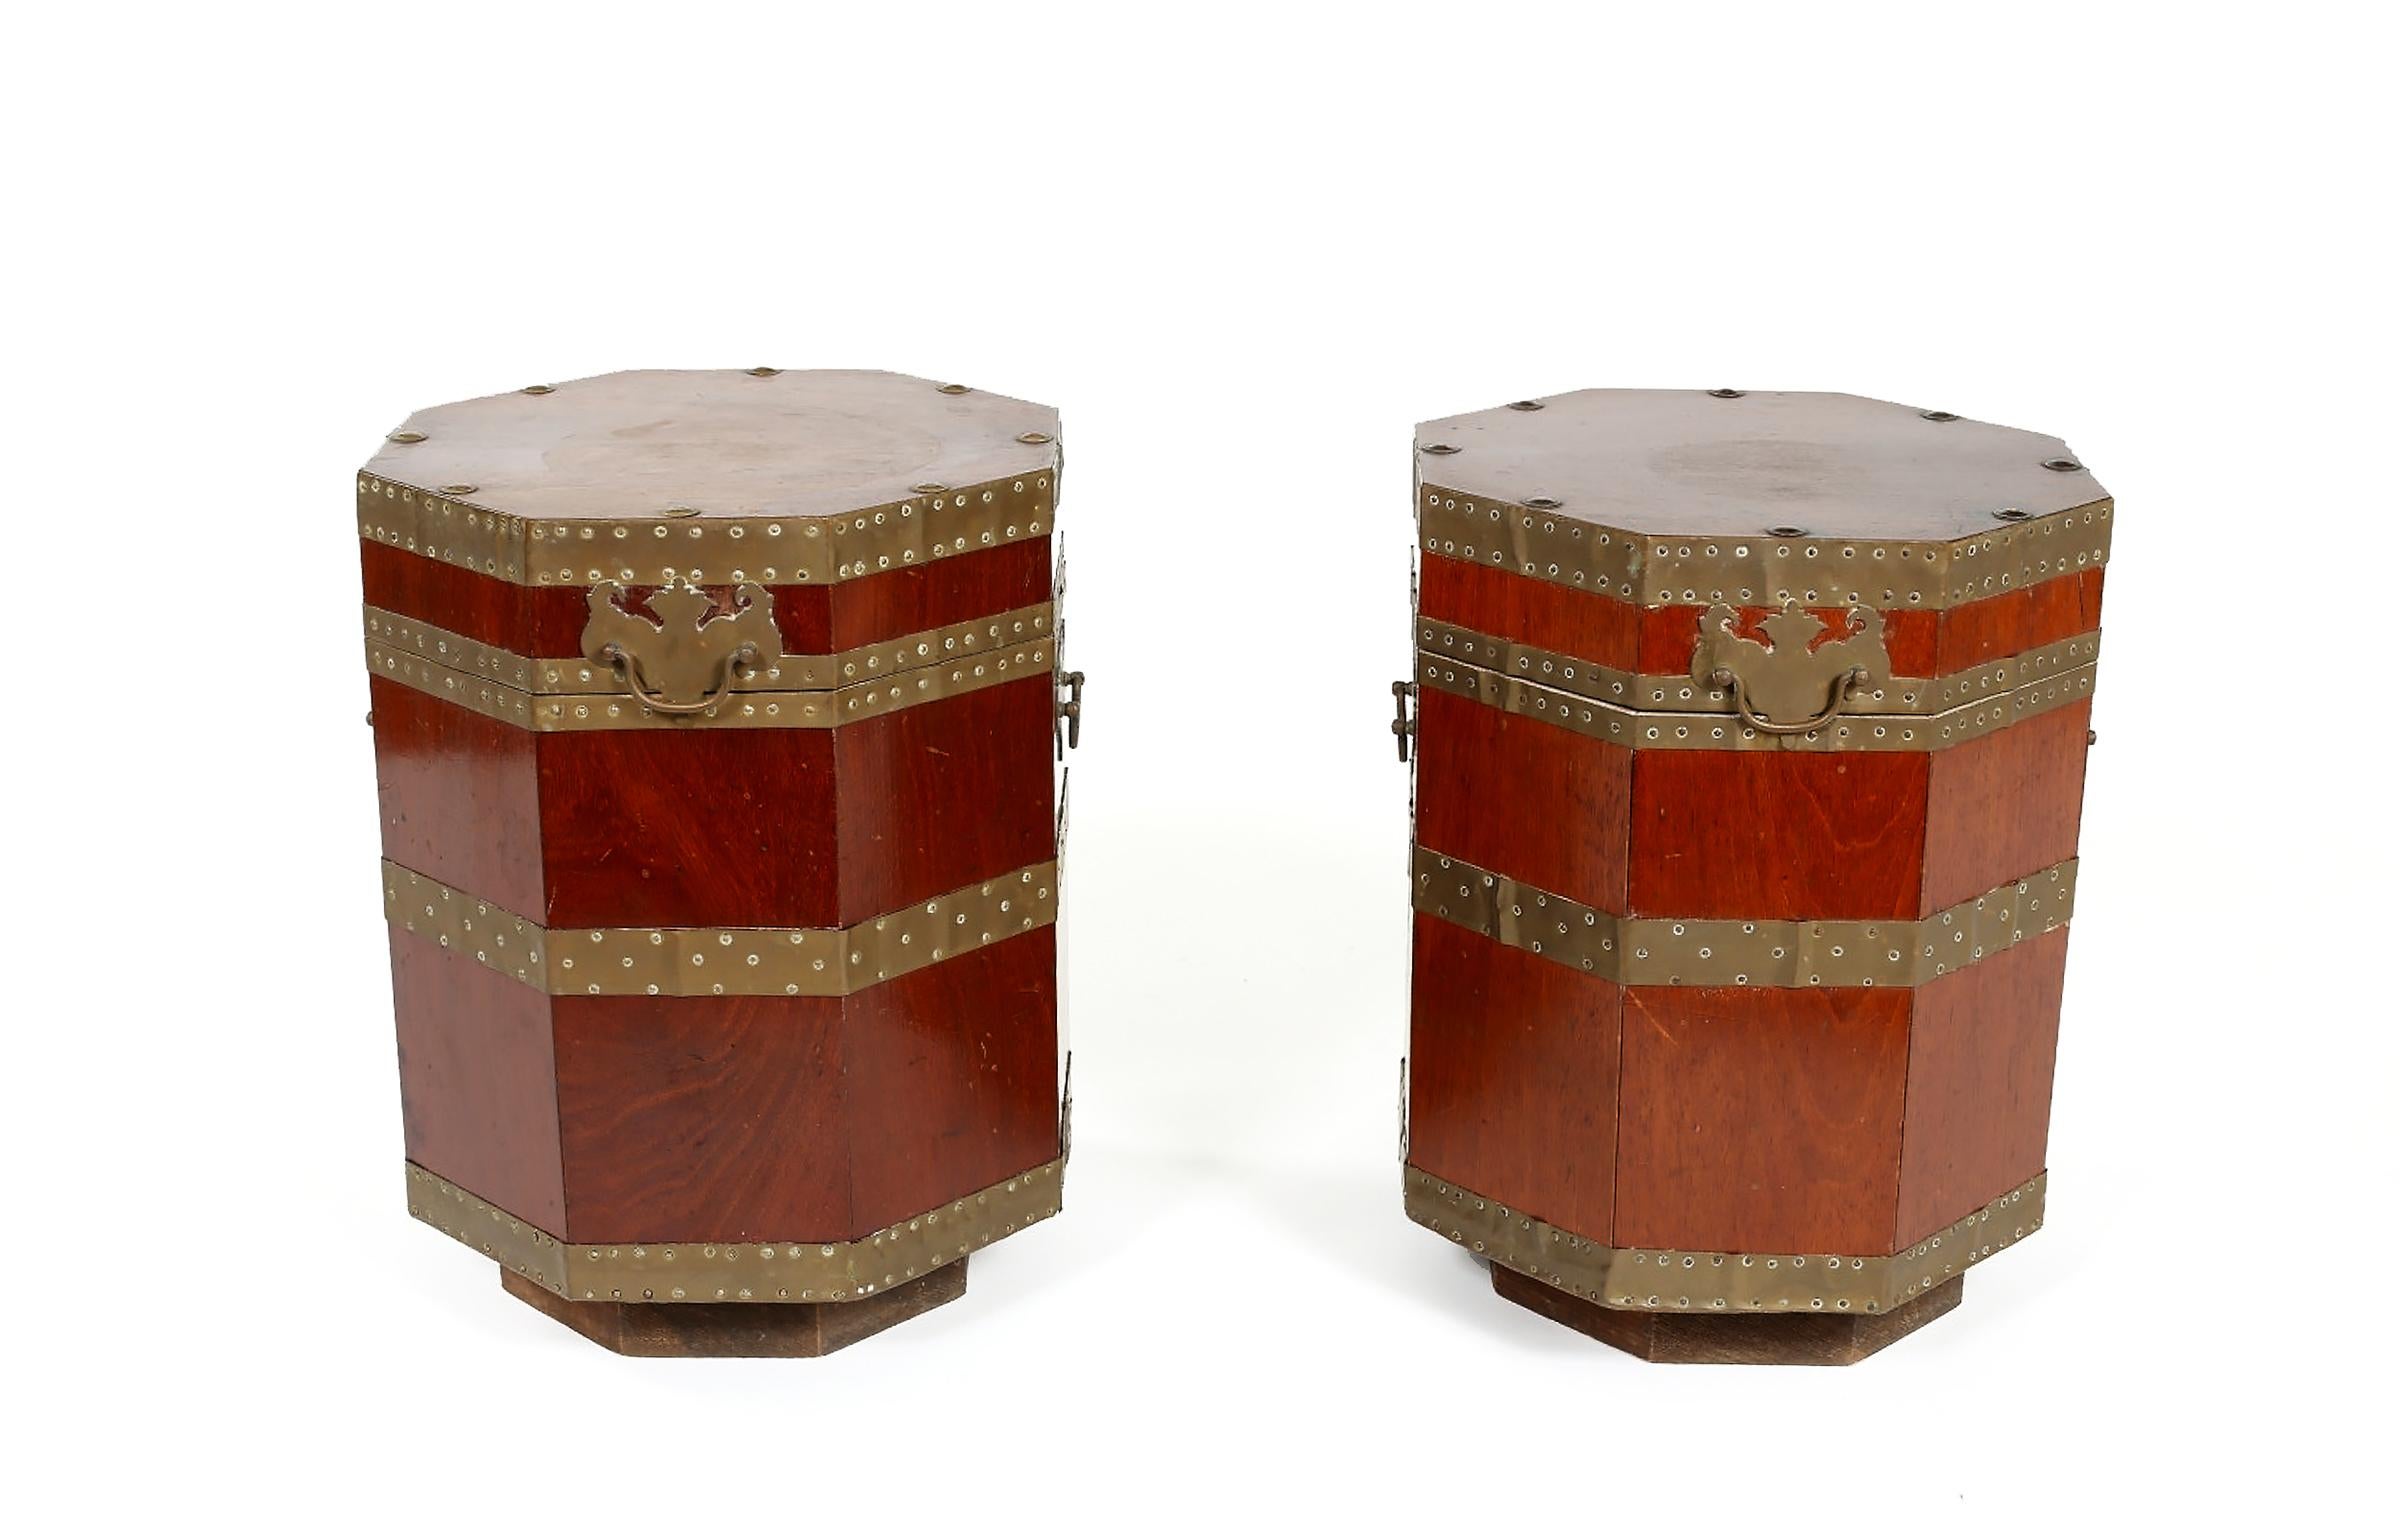 Pair of 19th century English brass-mounted lidded containers / tables with handles. Each piece is very sturdy and in good antique condition with wear appropriate to age / use. Each container / table is about 17 inches high x 13 inches diameter.